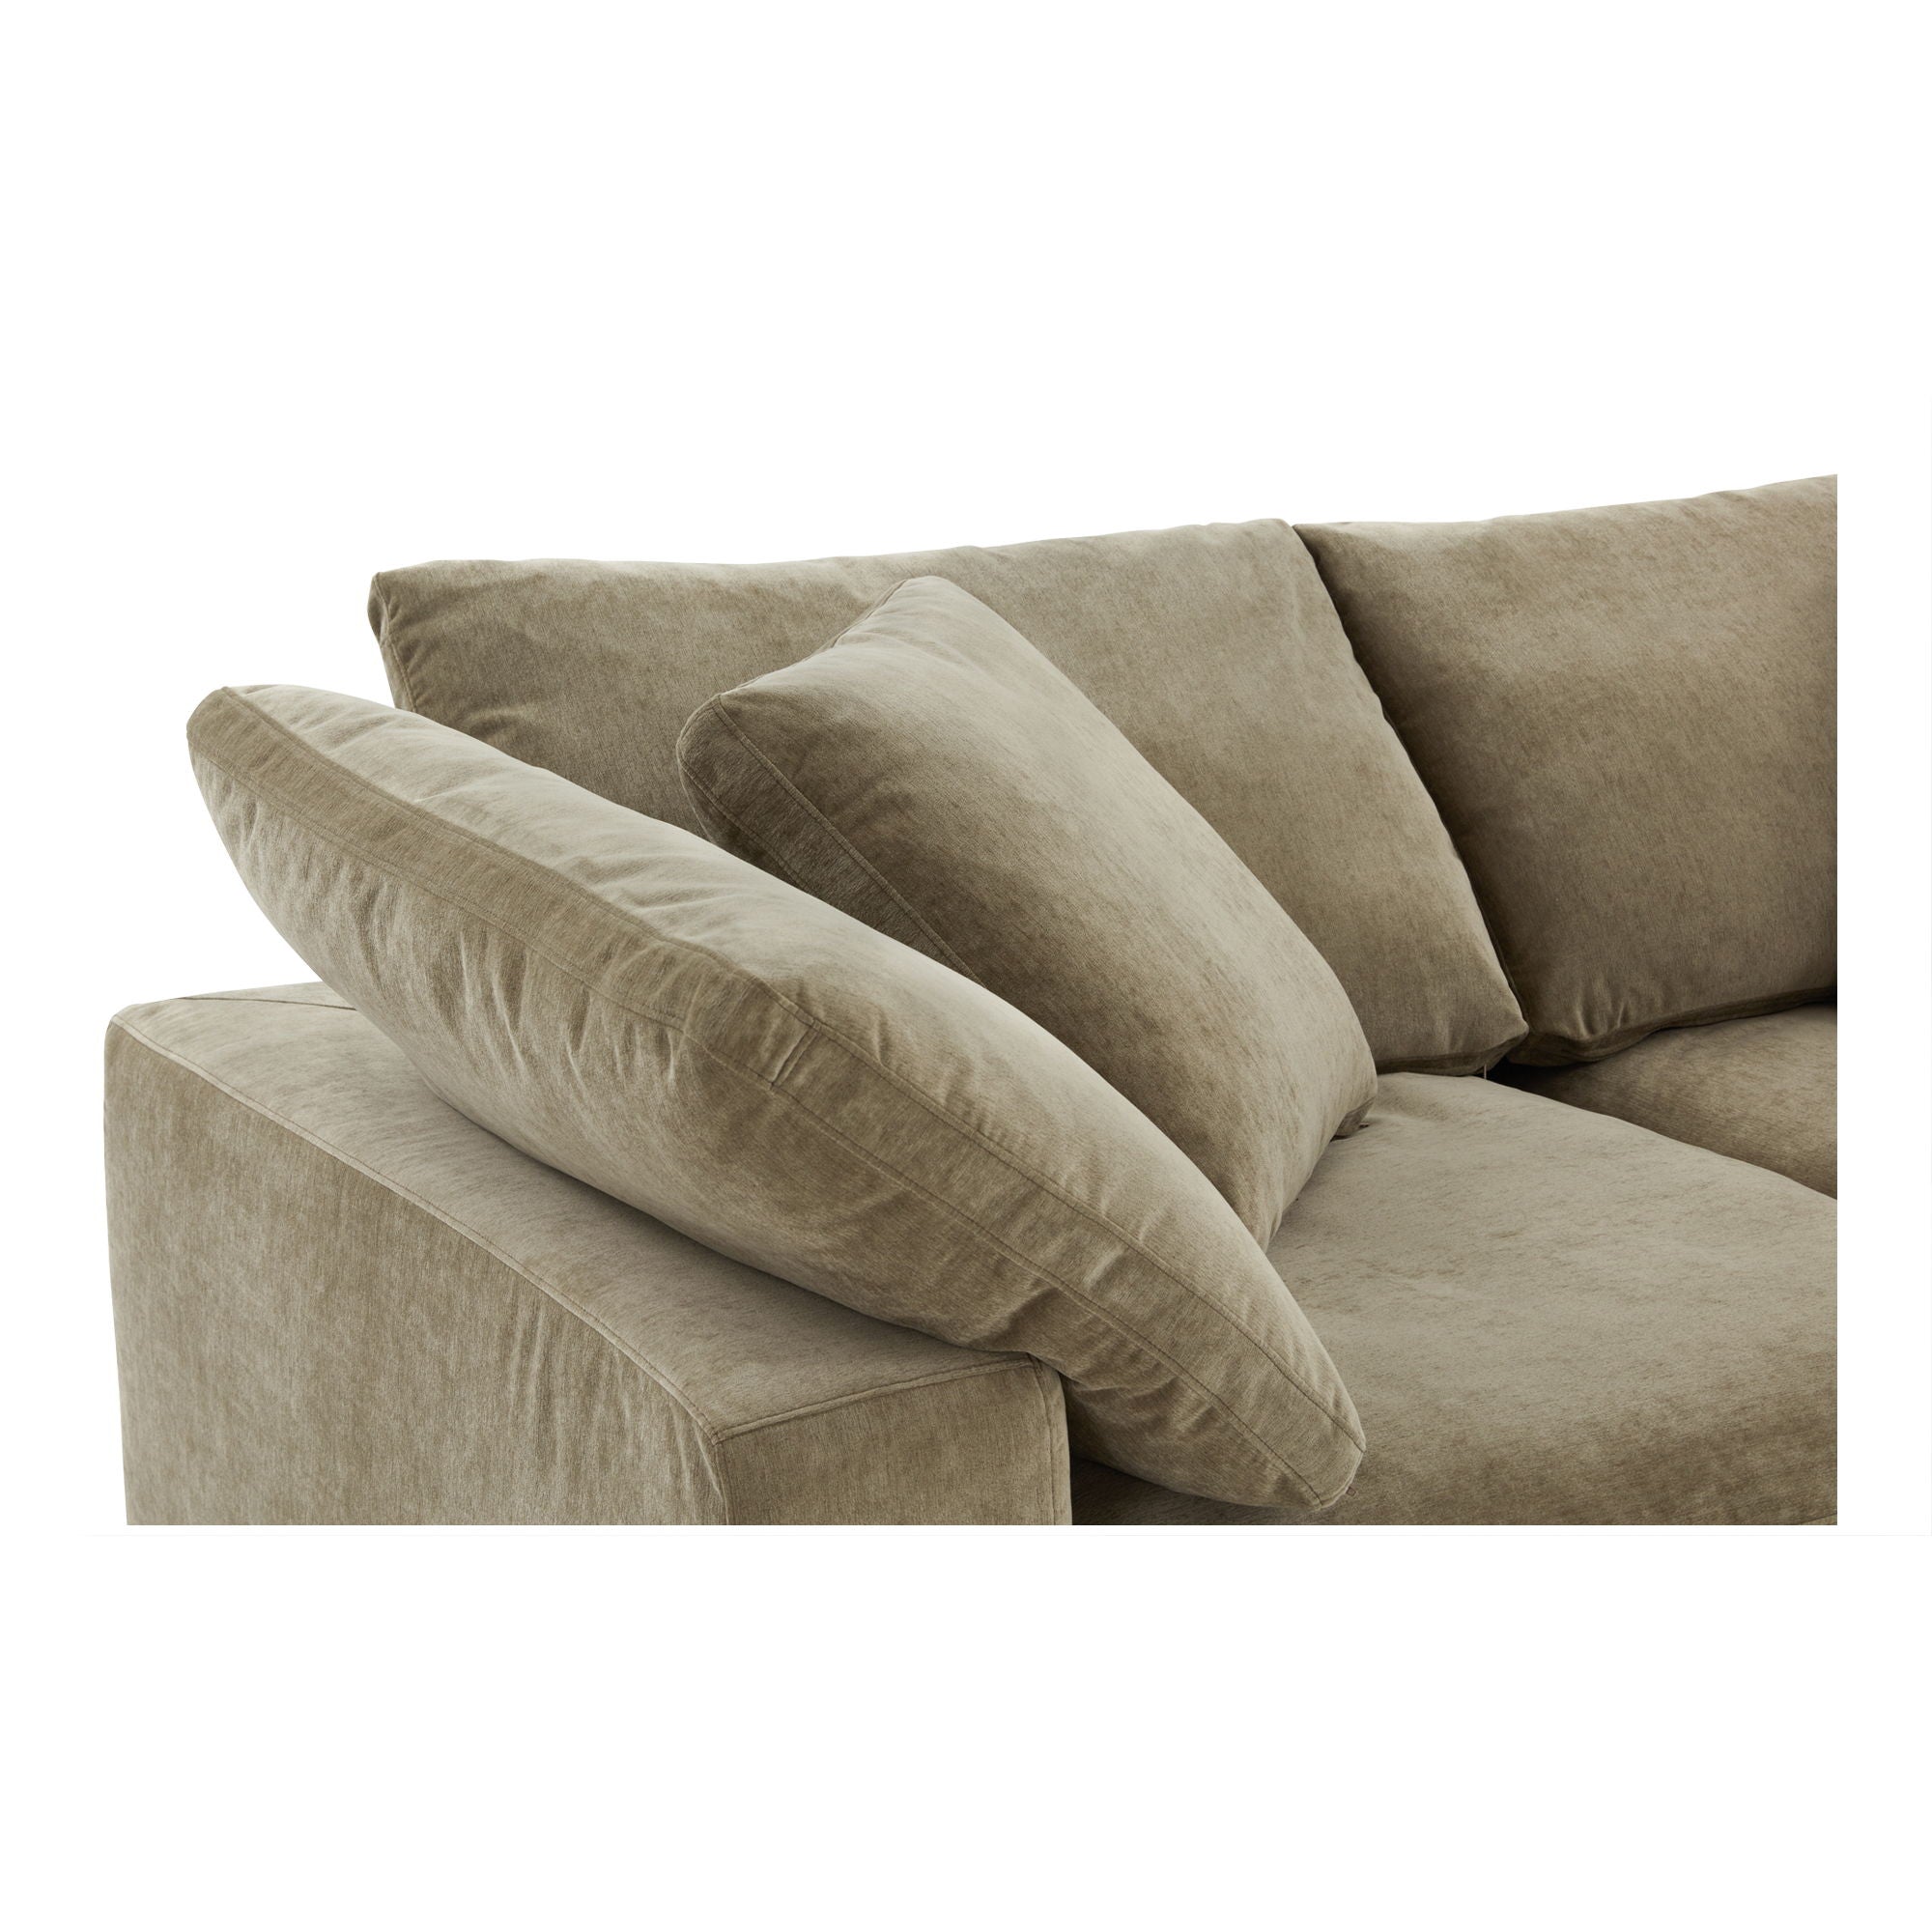 Clay Classic - L Modular Sectional Performance - Desert Sage-Stationary Sectionals-American Furniture Outlet